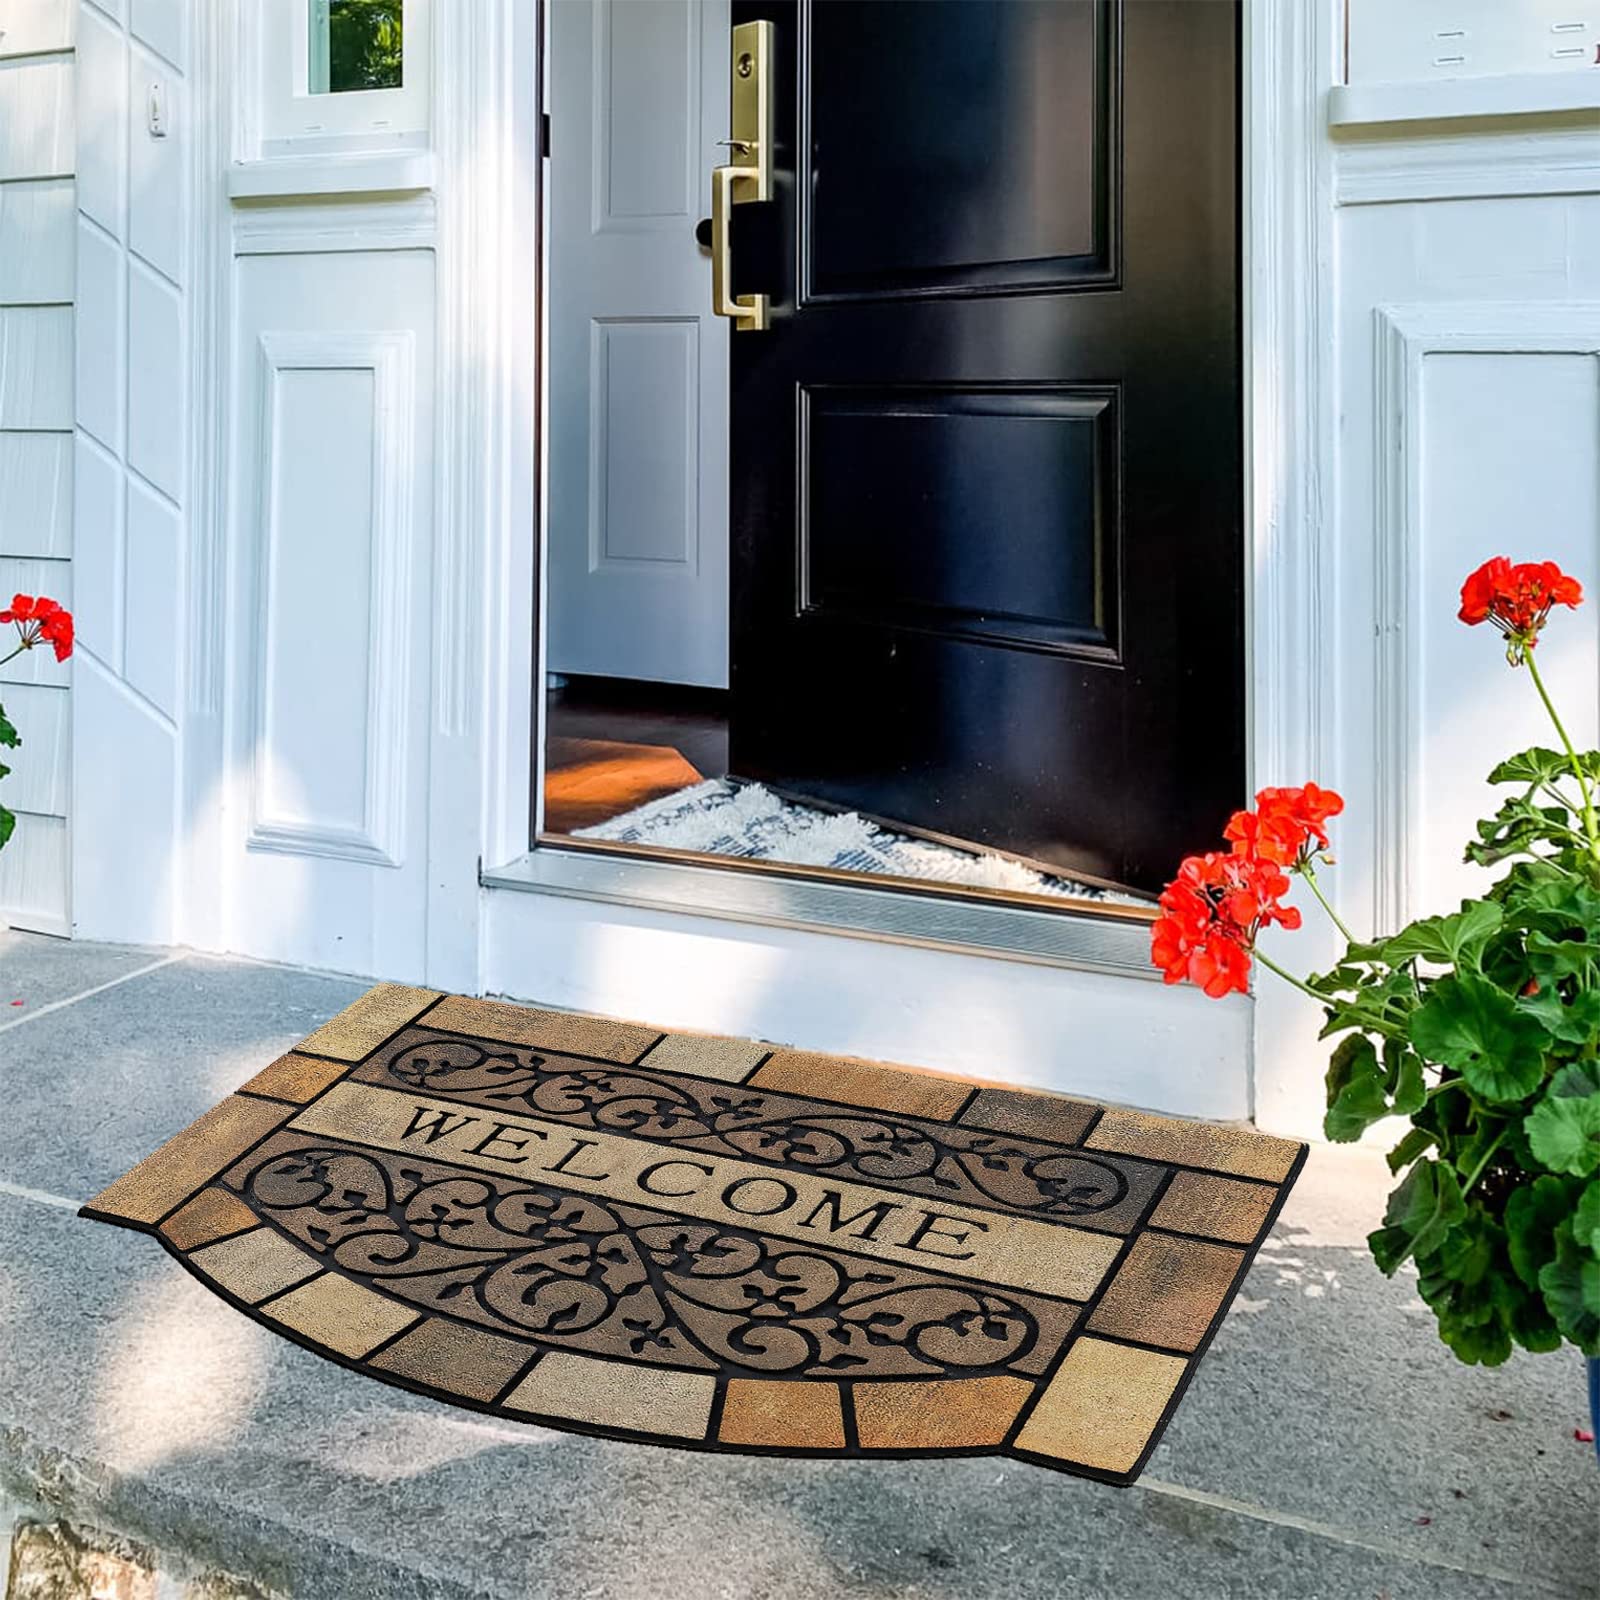 CHICHIC Entrance Door Mat Large 24 x 36 Inch Entry Way Doormat Front Door Rugs Outdoors Heavy Duty Welcome Mat, Non Slip Rubber Back Low Profile for Garage, Patio, High Traffic Area, Vine